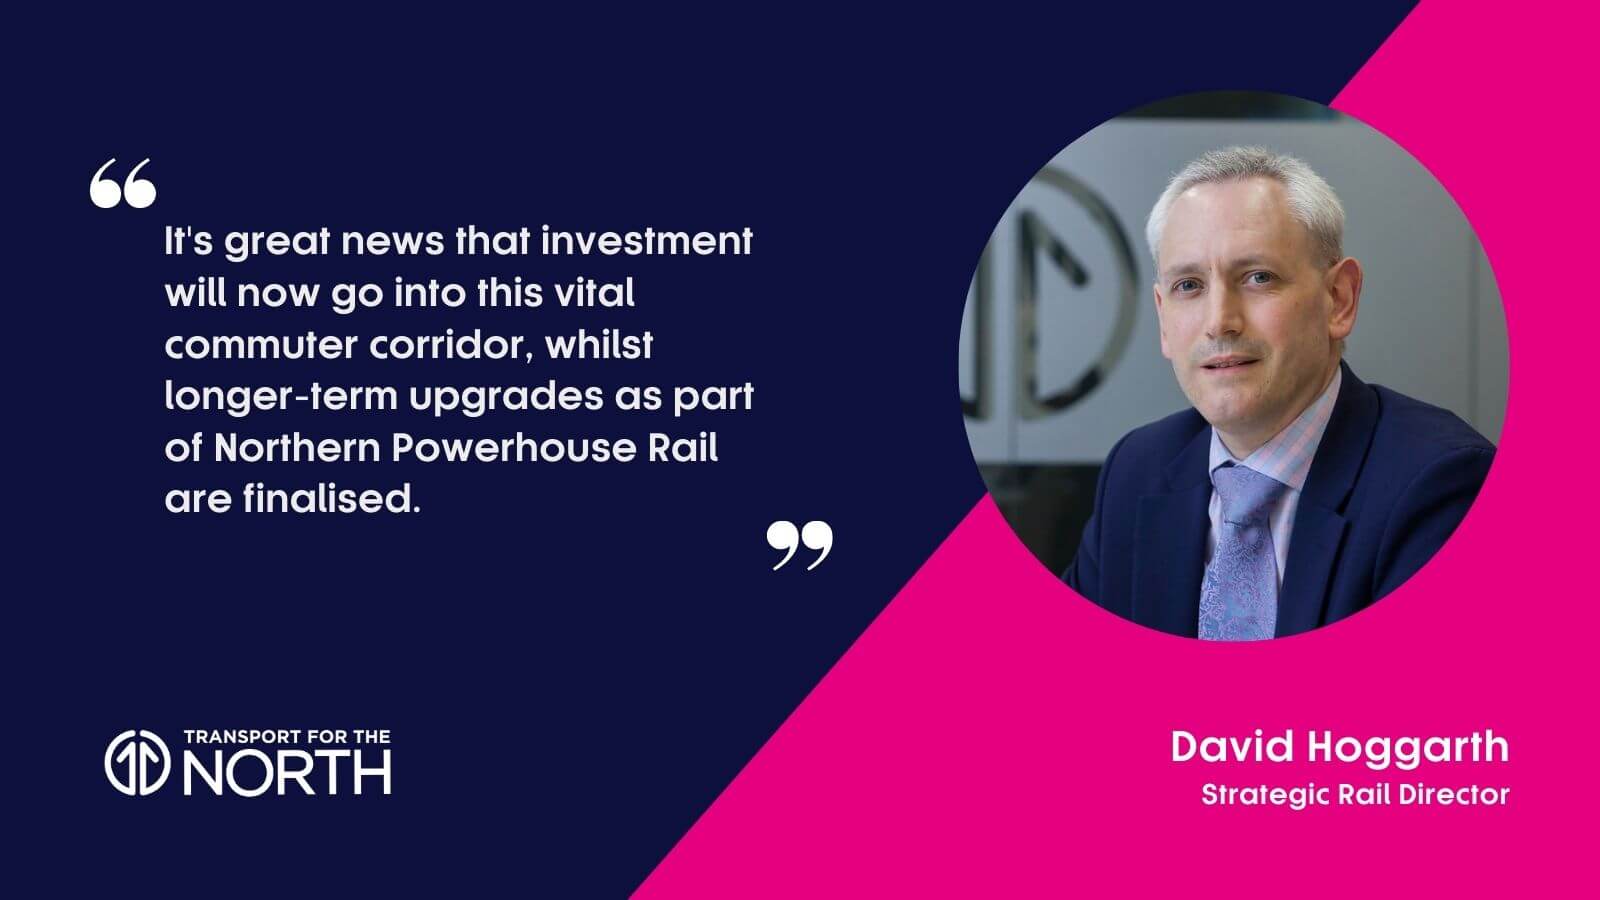 David Hoggarth's response to investment in Hope Valley Line